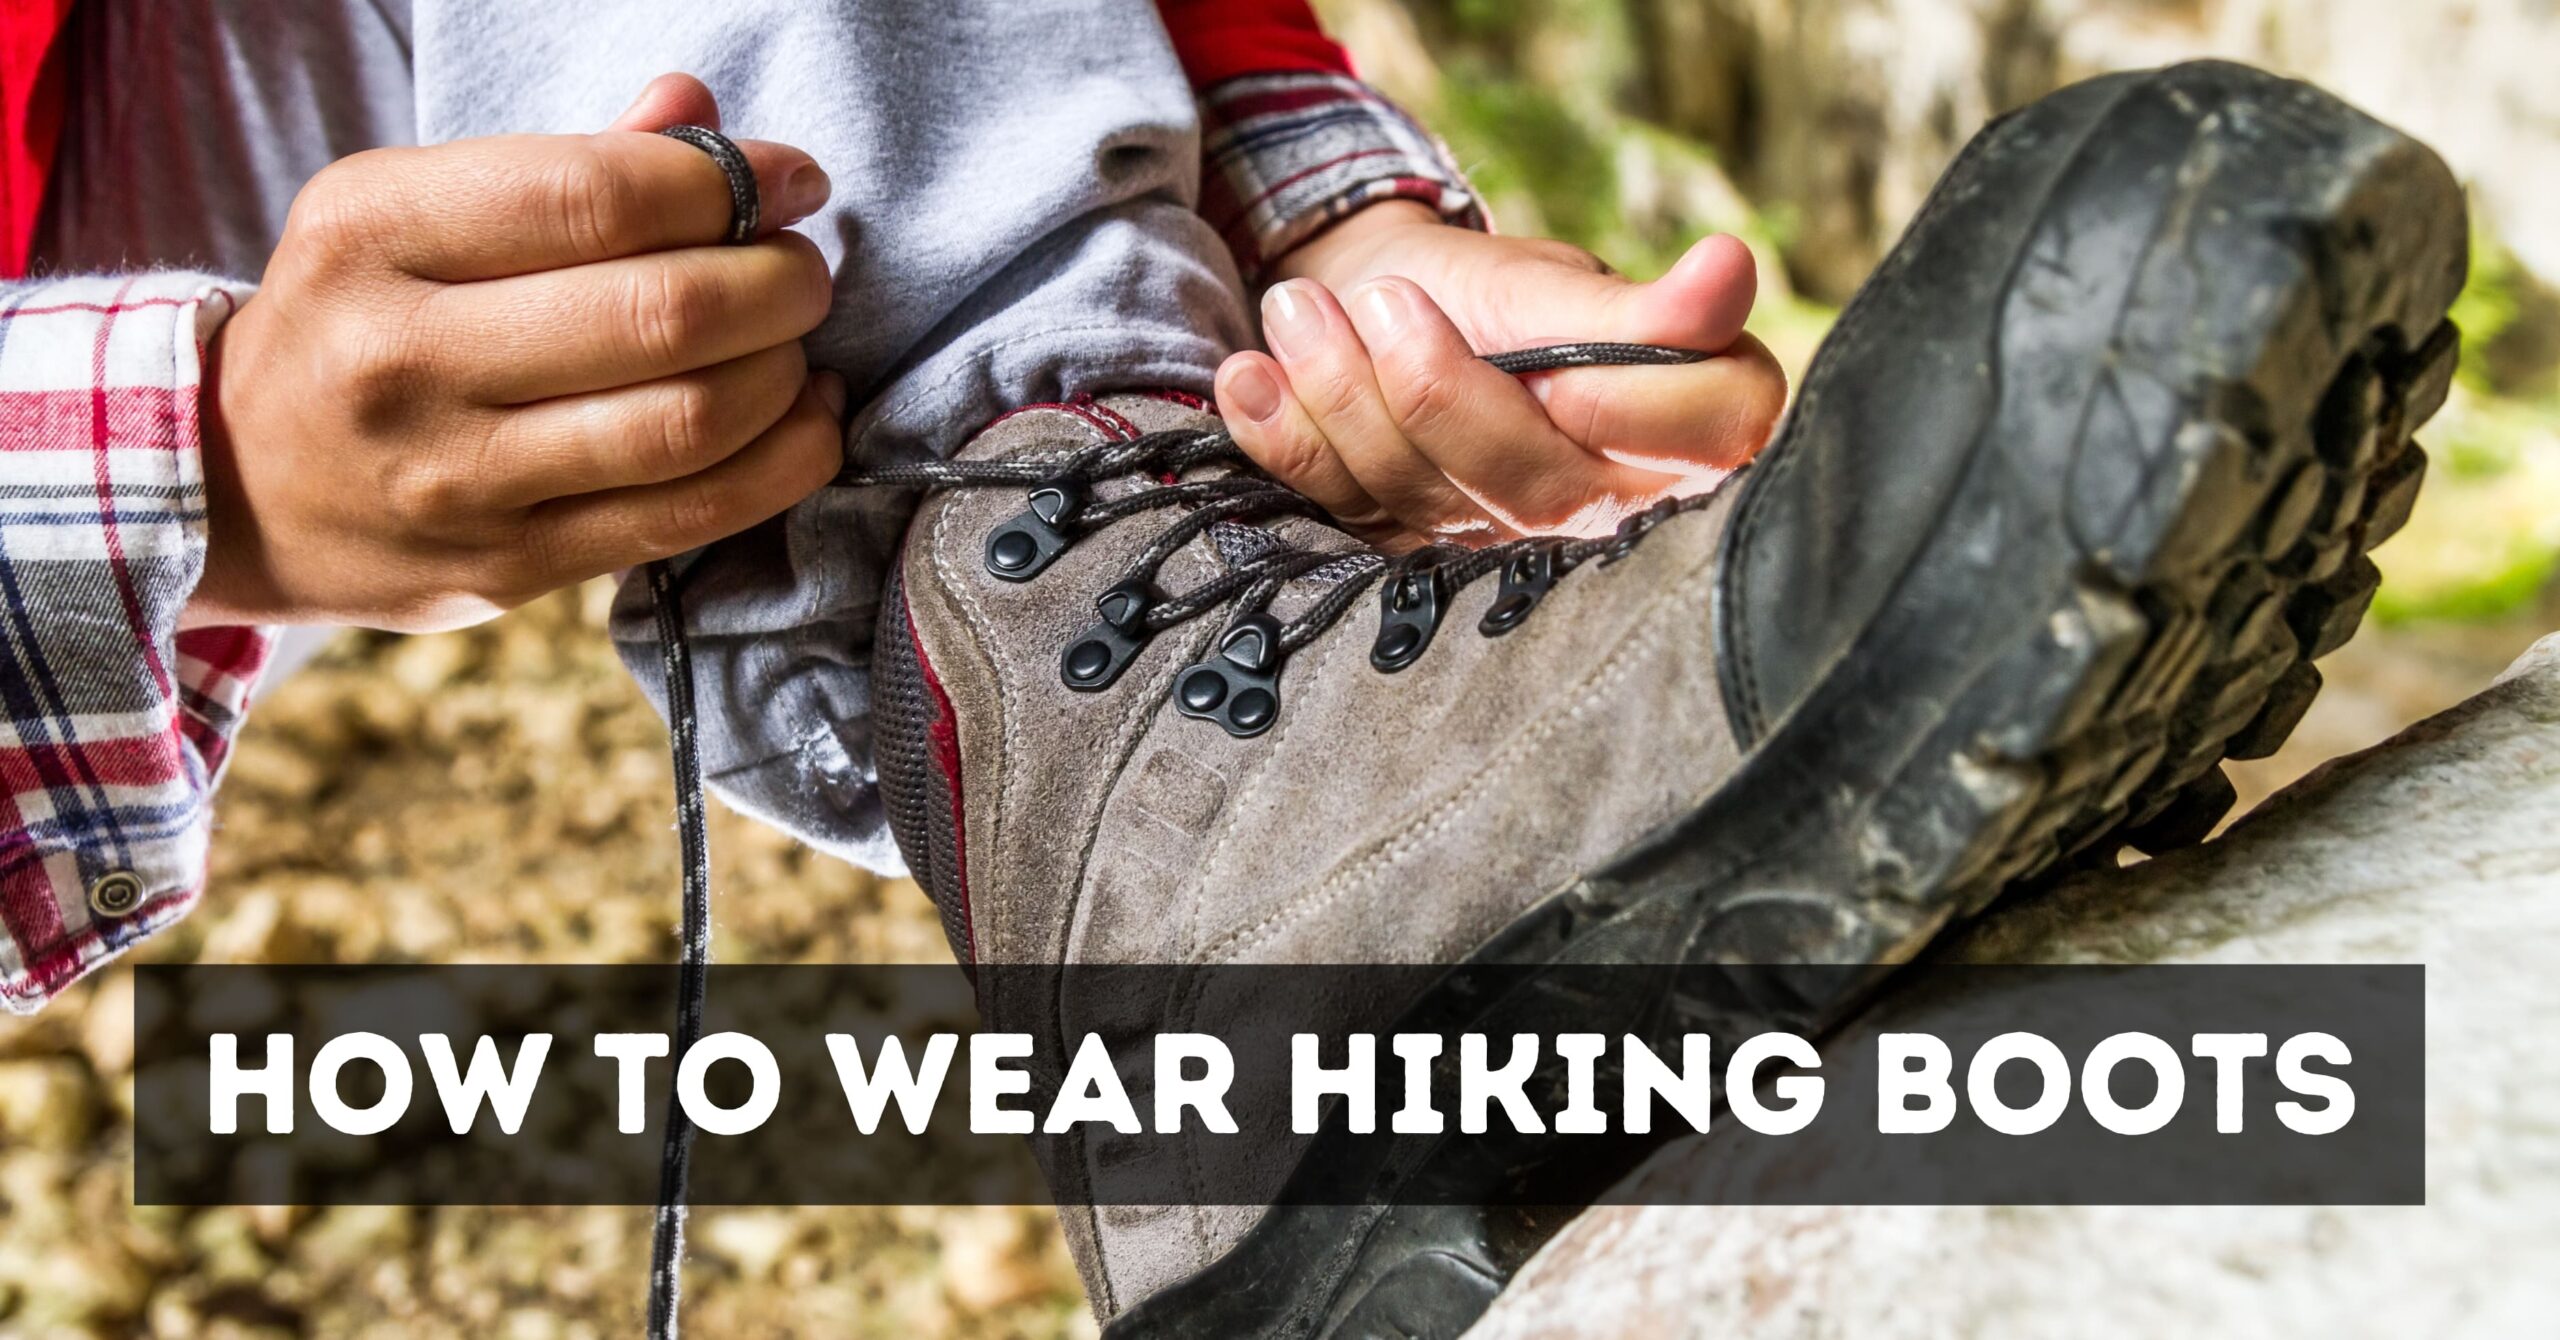 How To Wear Hiking Boots? 9 Best Methods